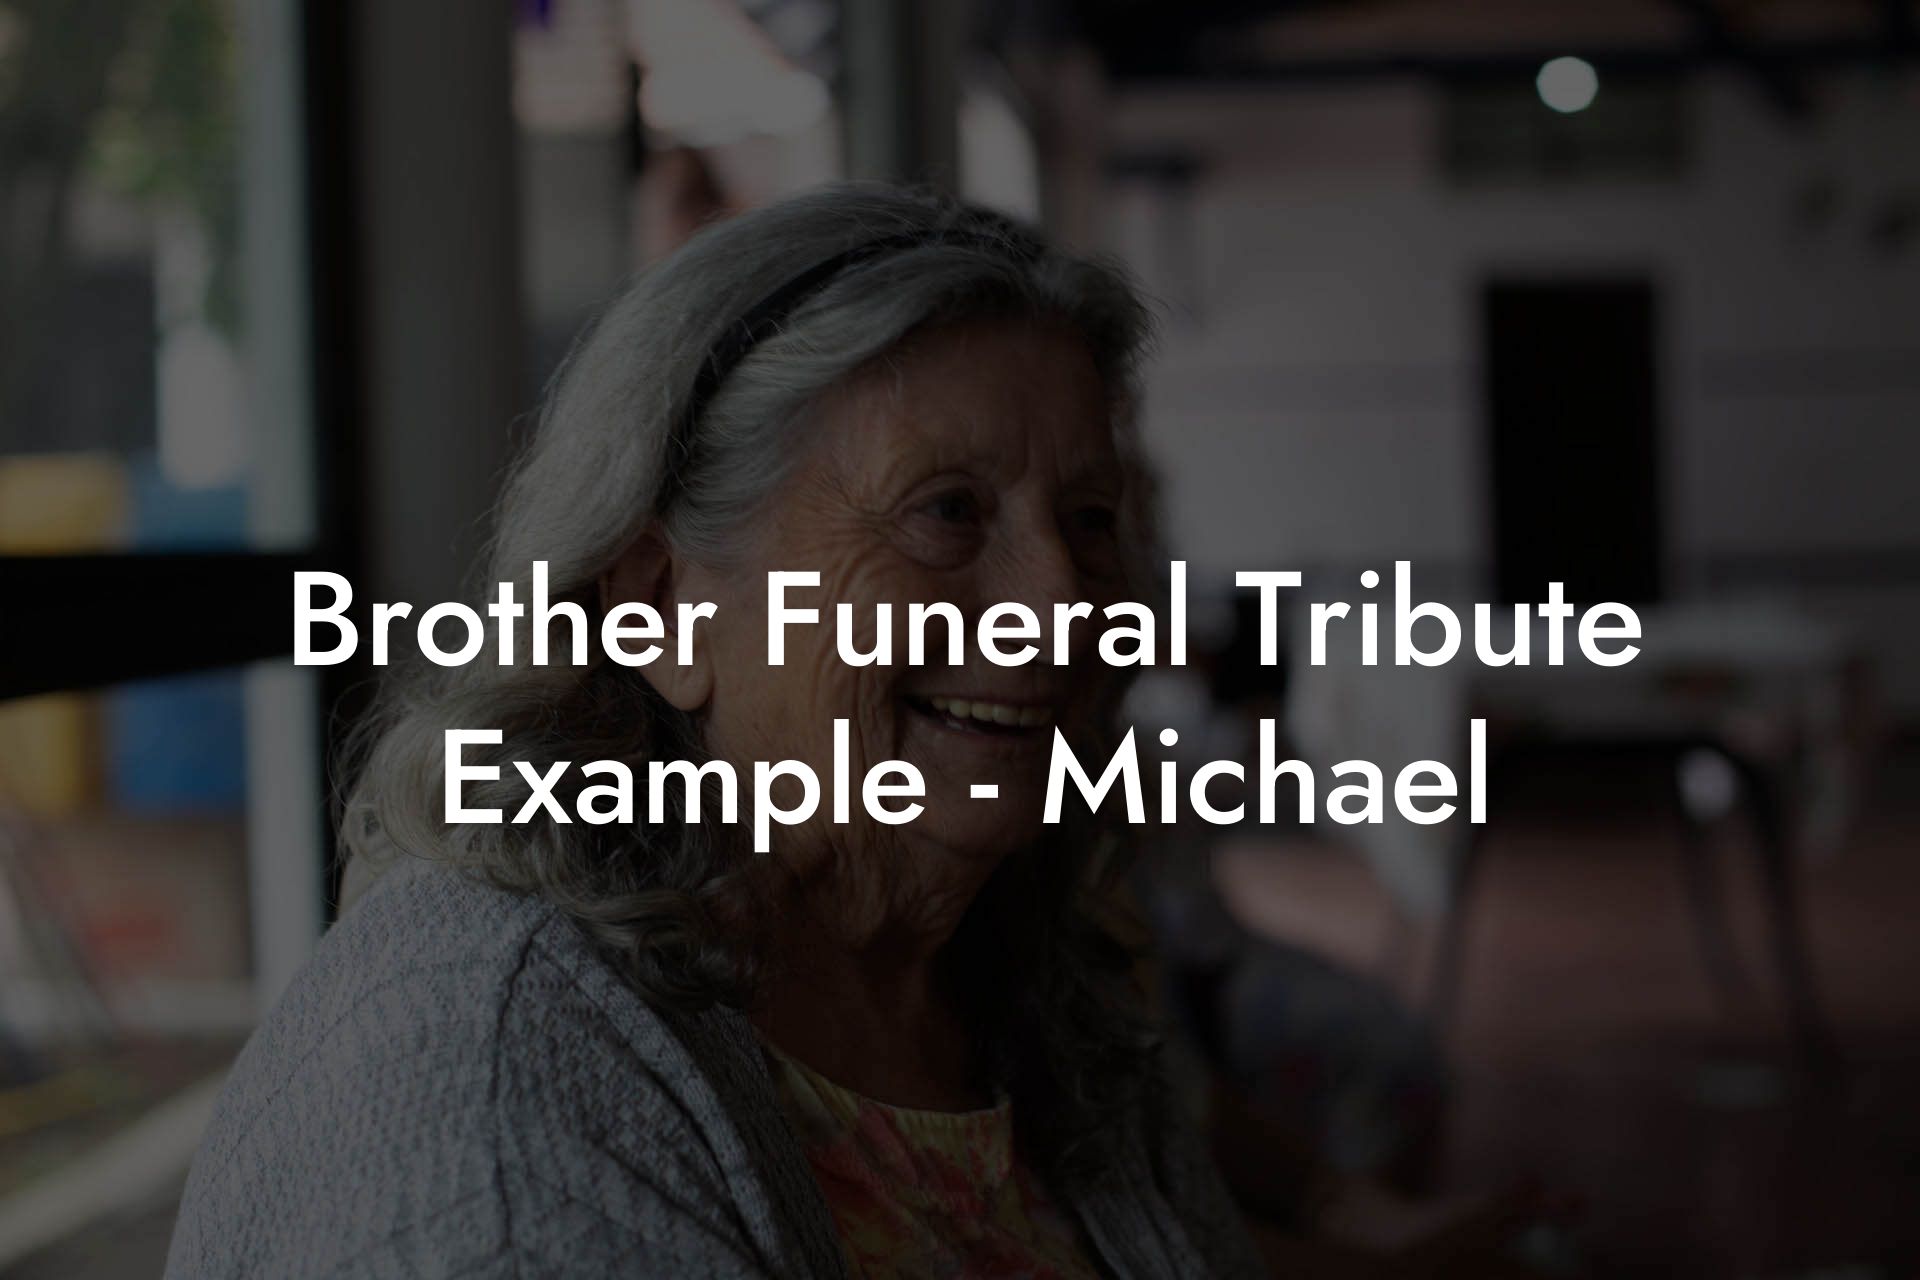 Brother Funeral Tribute Example - Michael